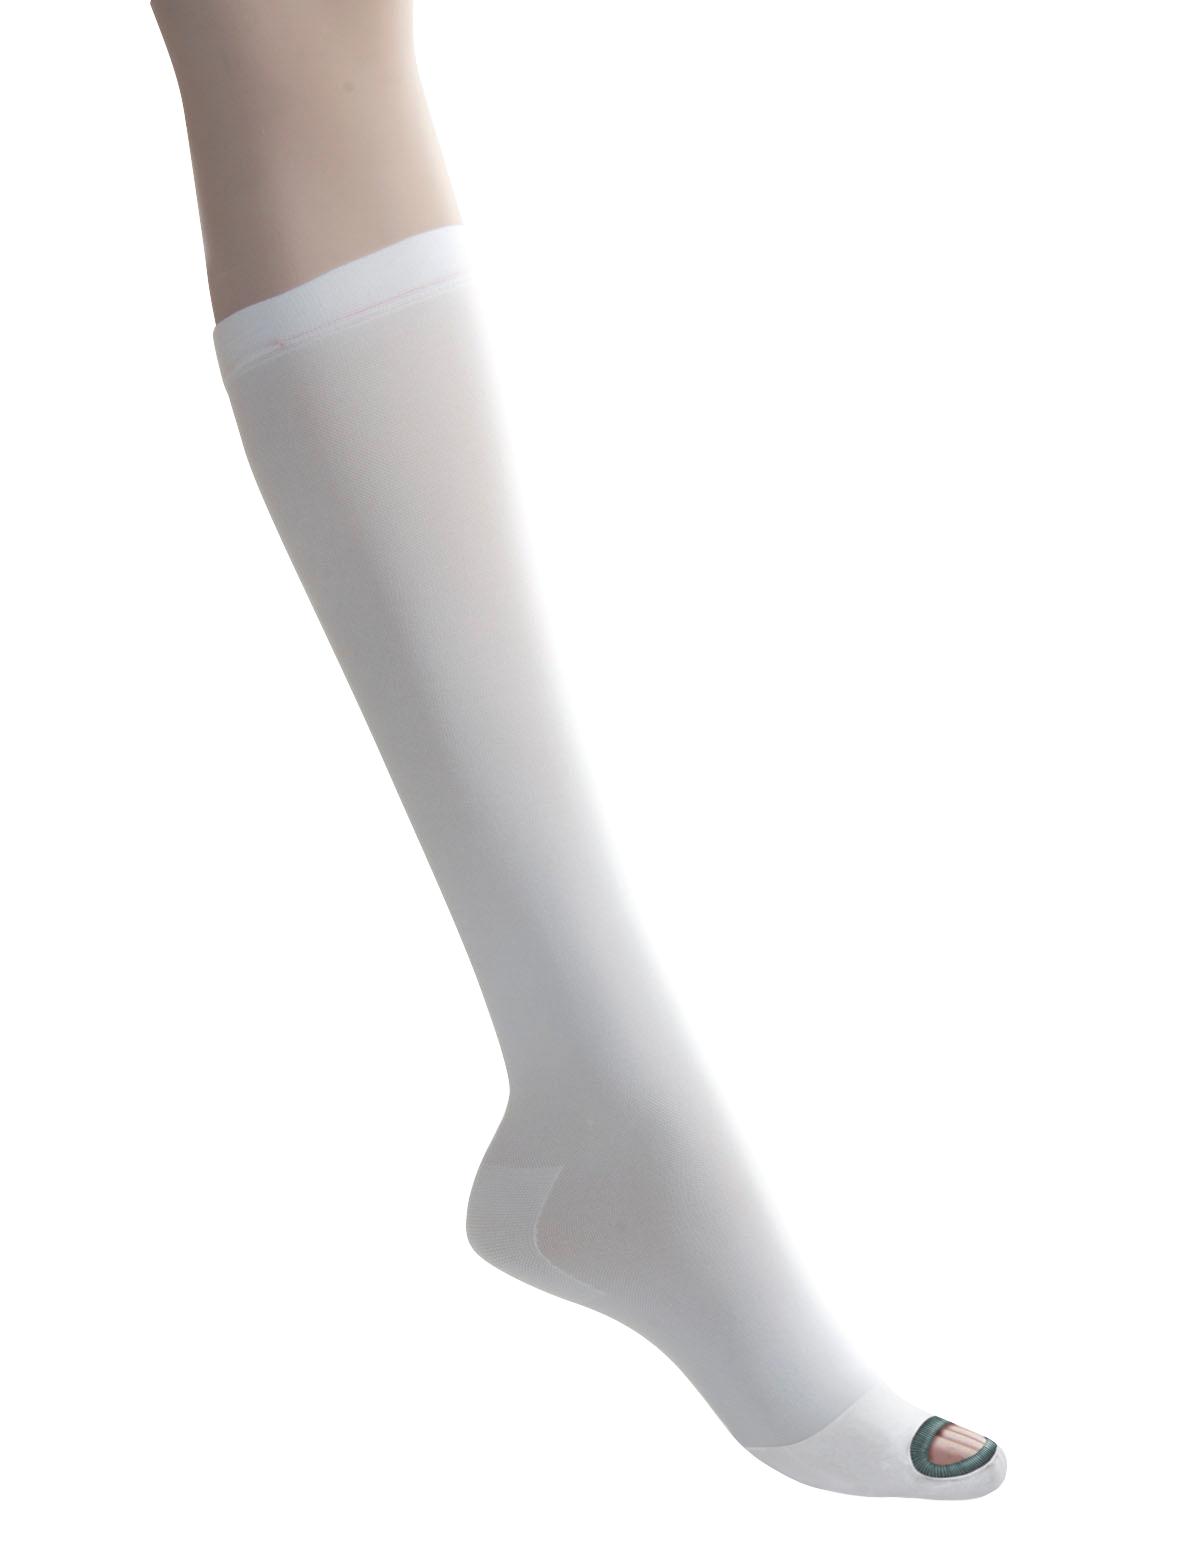 TED Hose: Best Recommended Guide to TED Stockings vs Compression Socks